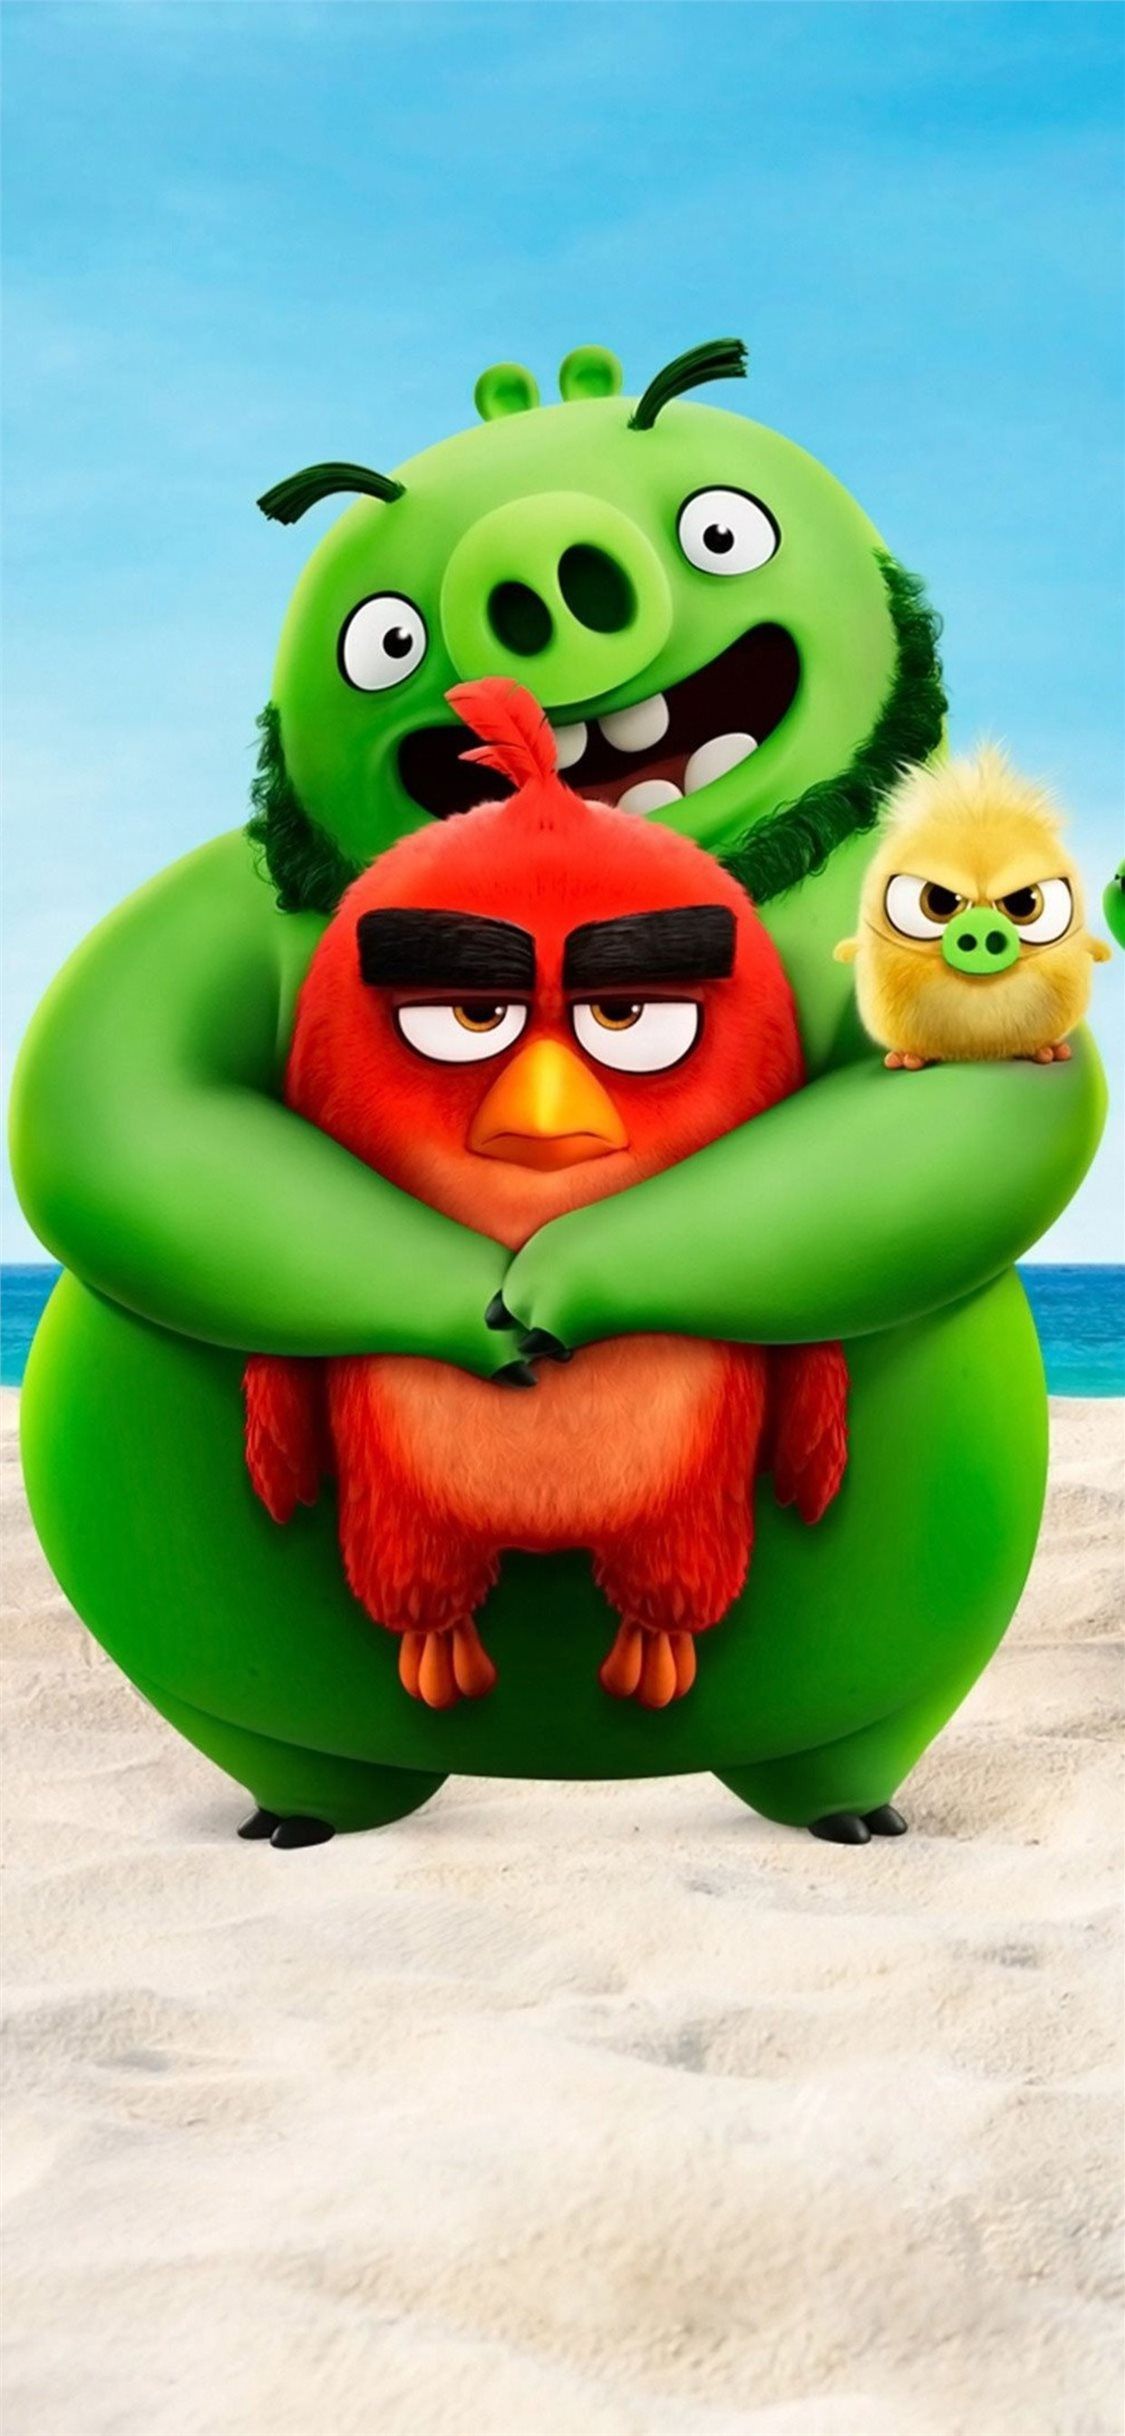 Angry Birds 2 Wallpaper